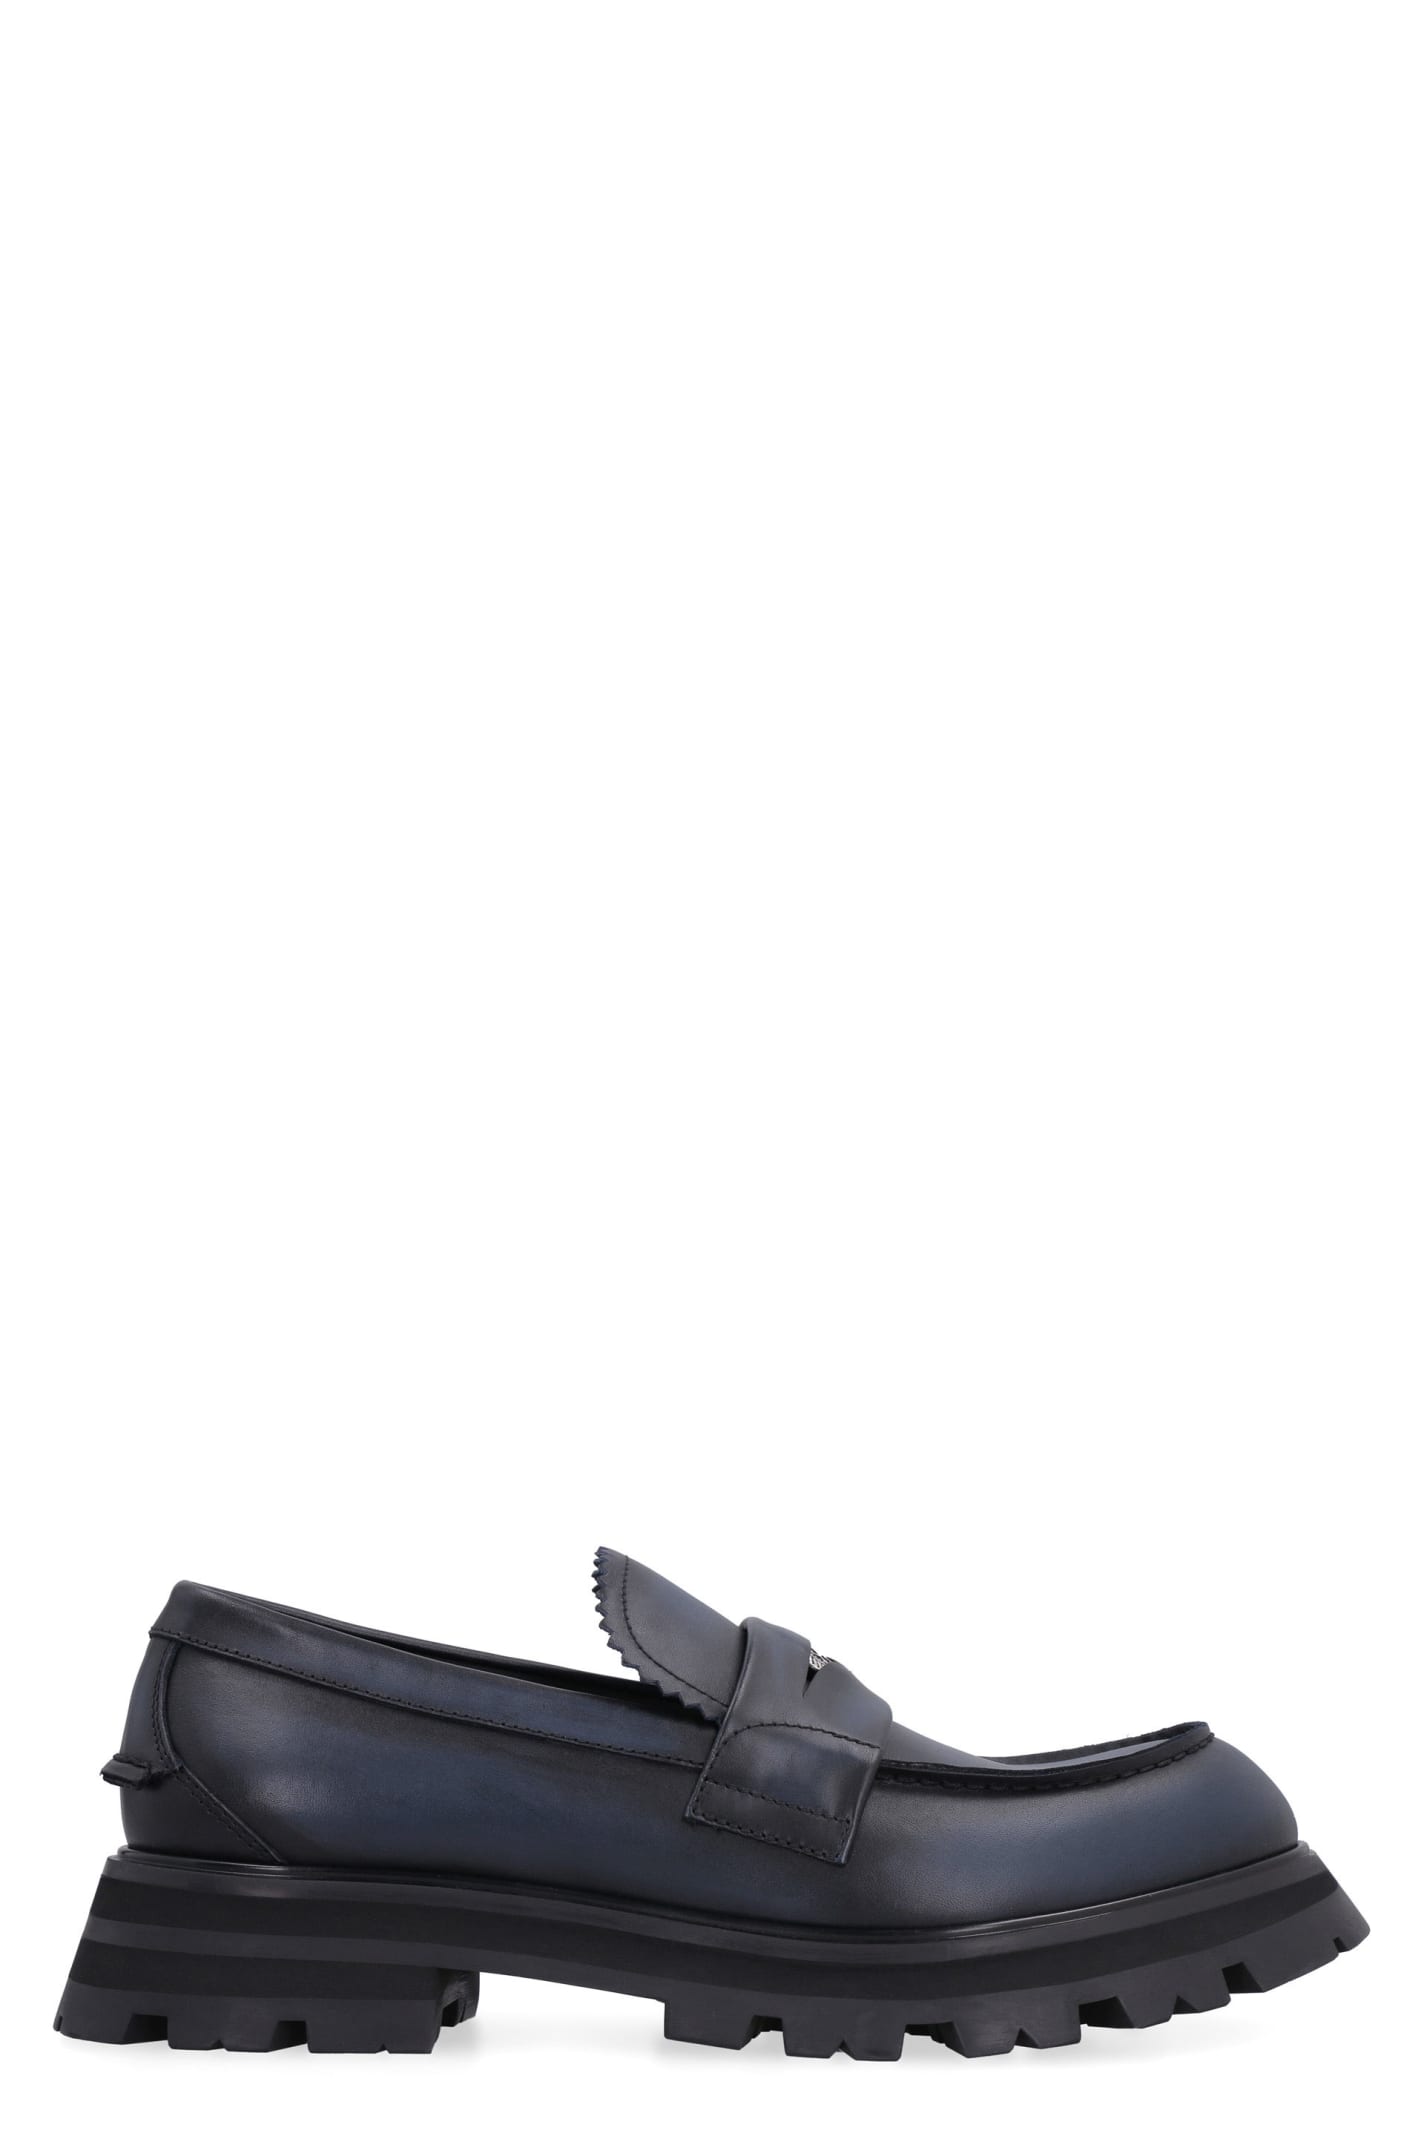 Alexander McQueen Seal Logo Leather Loafers